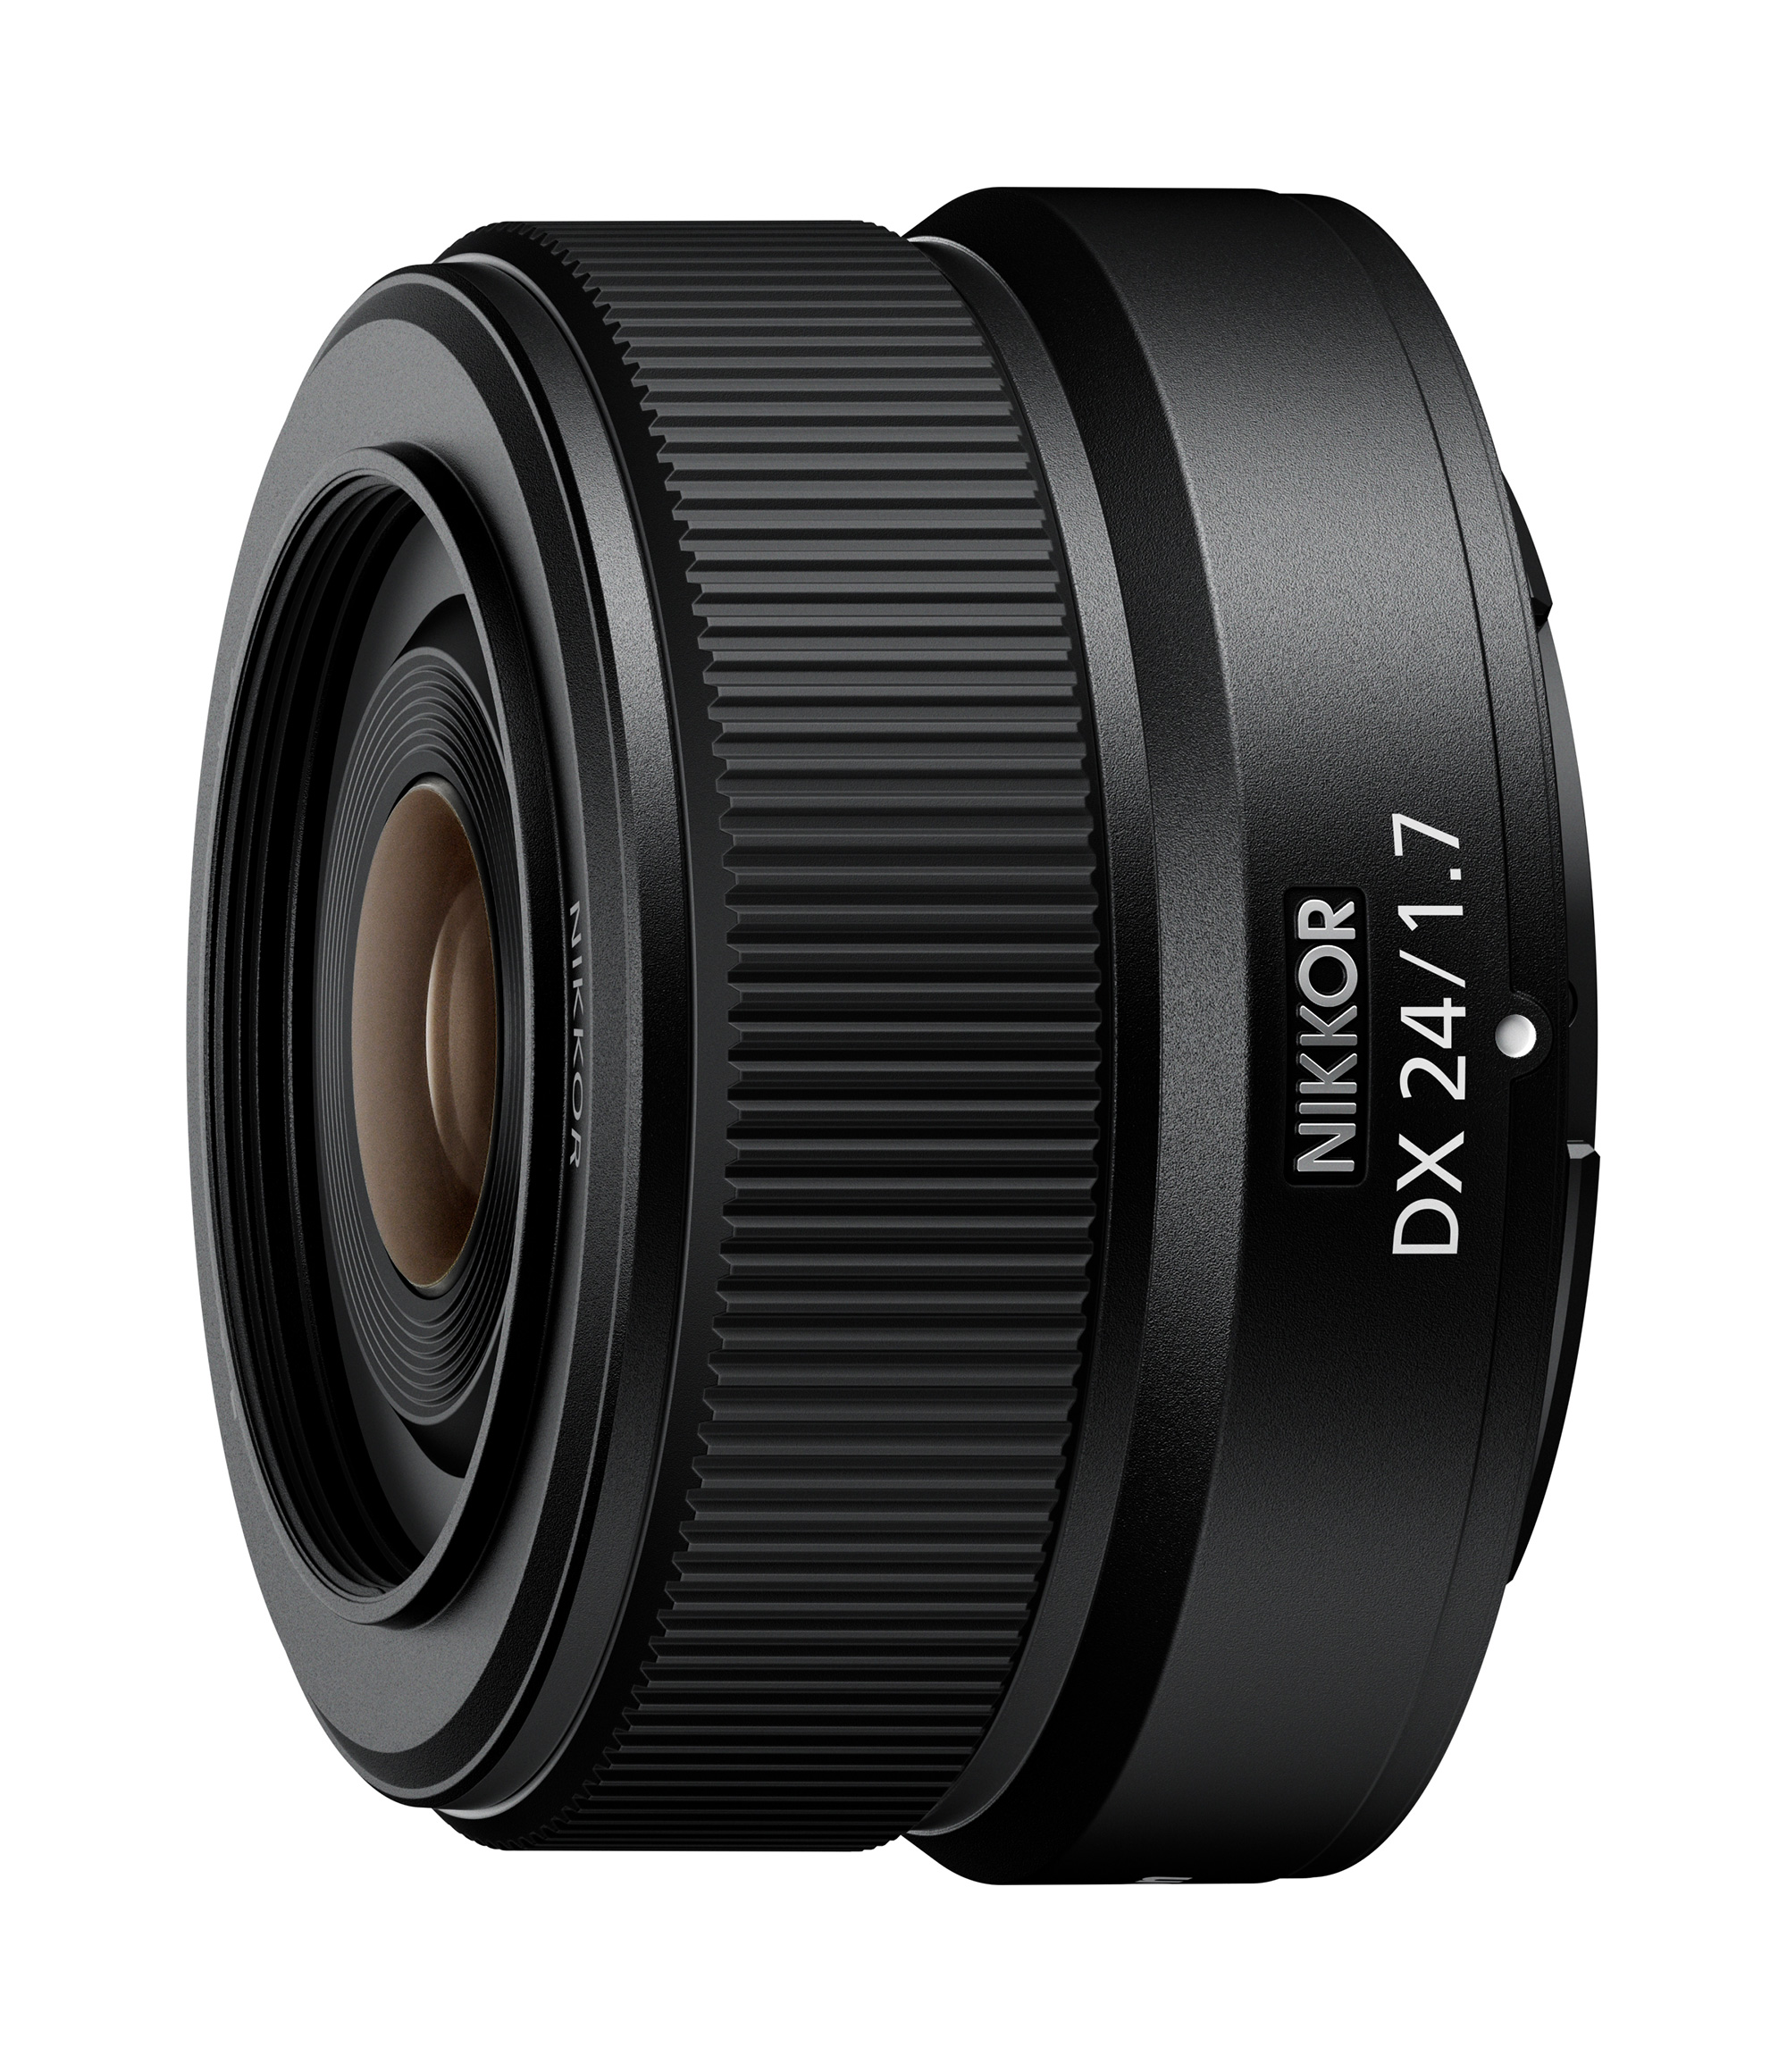 NIKKOR Z DX 24 mm f/1.7 - first APS-C fixed focal length for Nikon Z mount for 319,- Euro